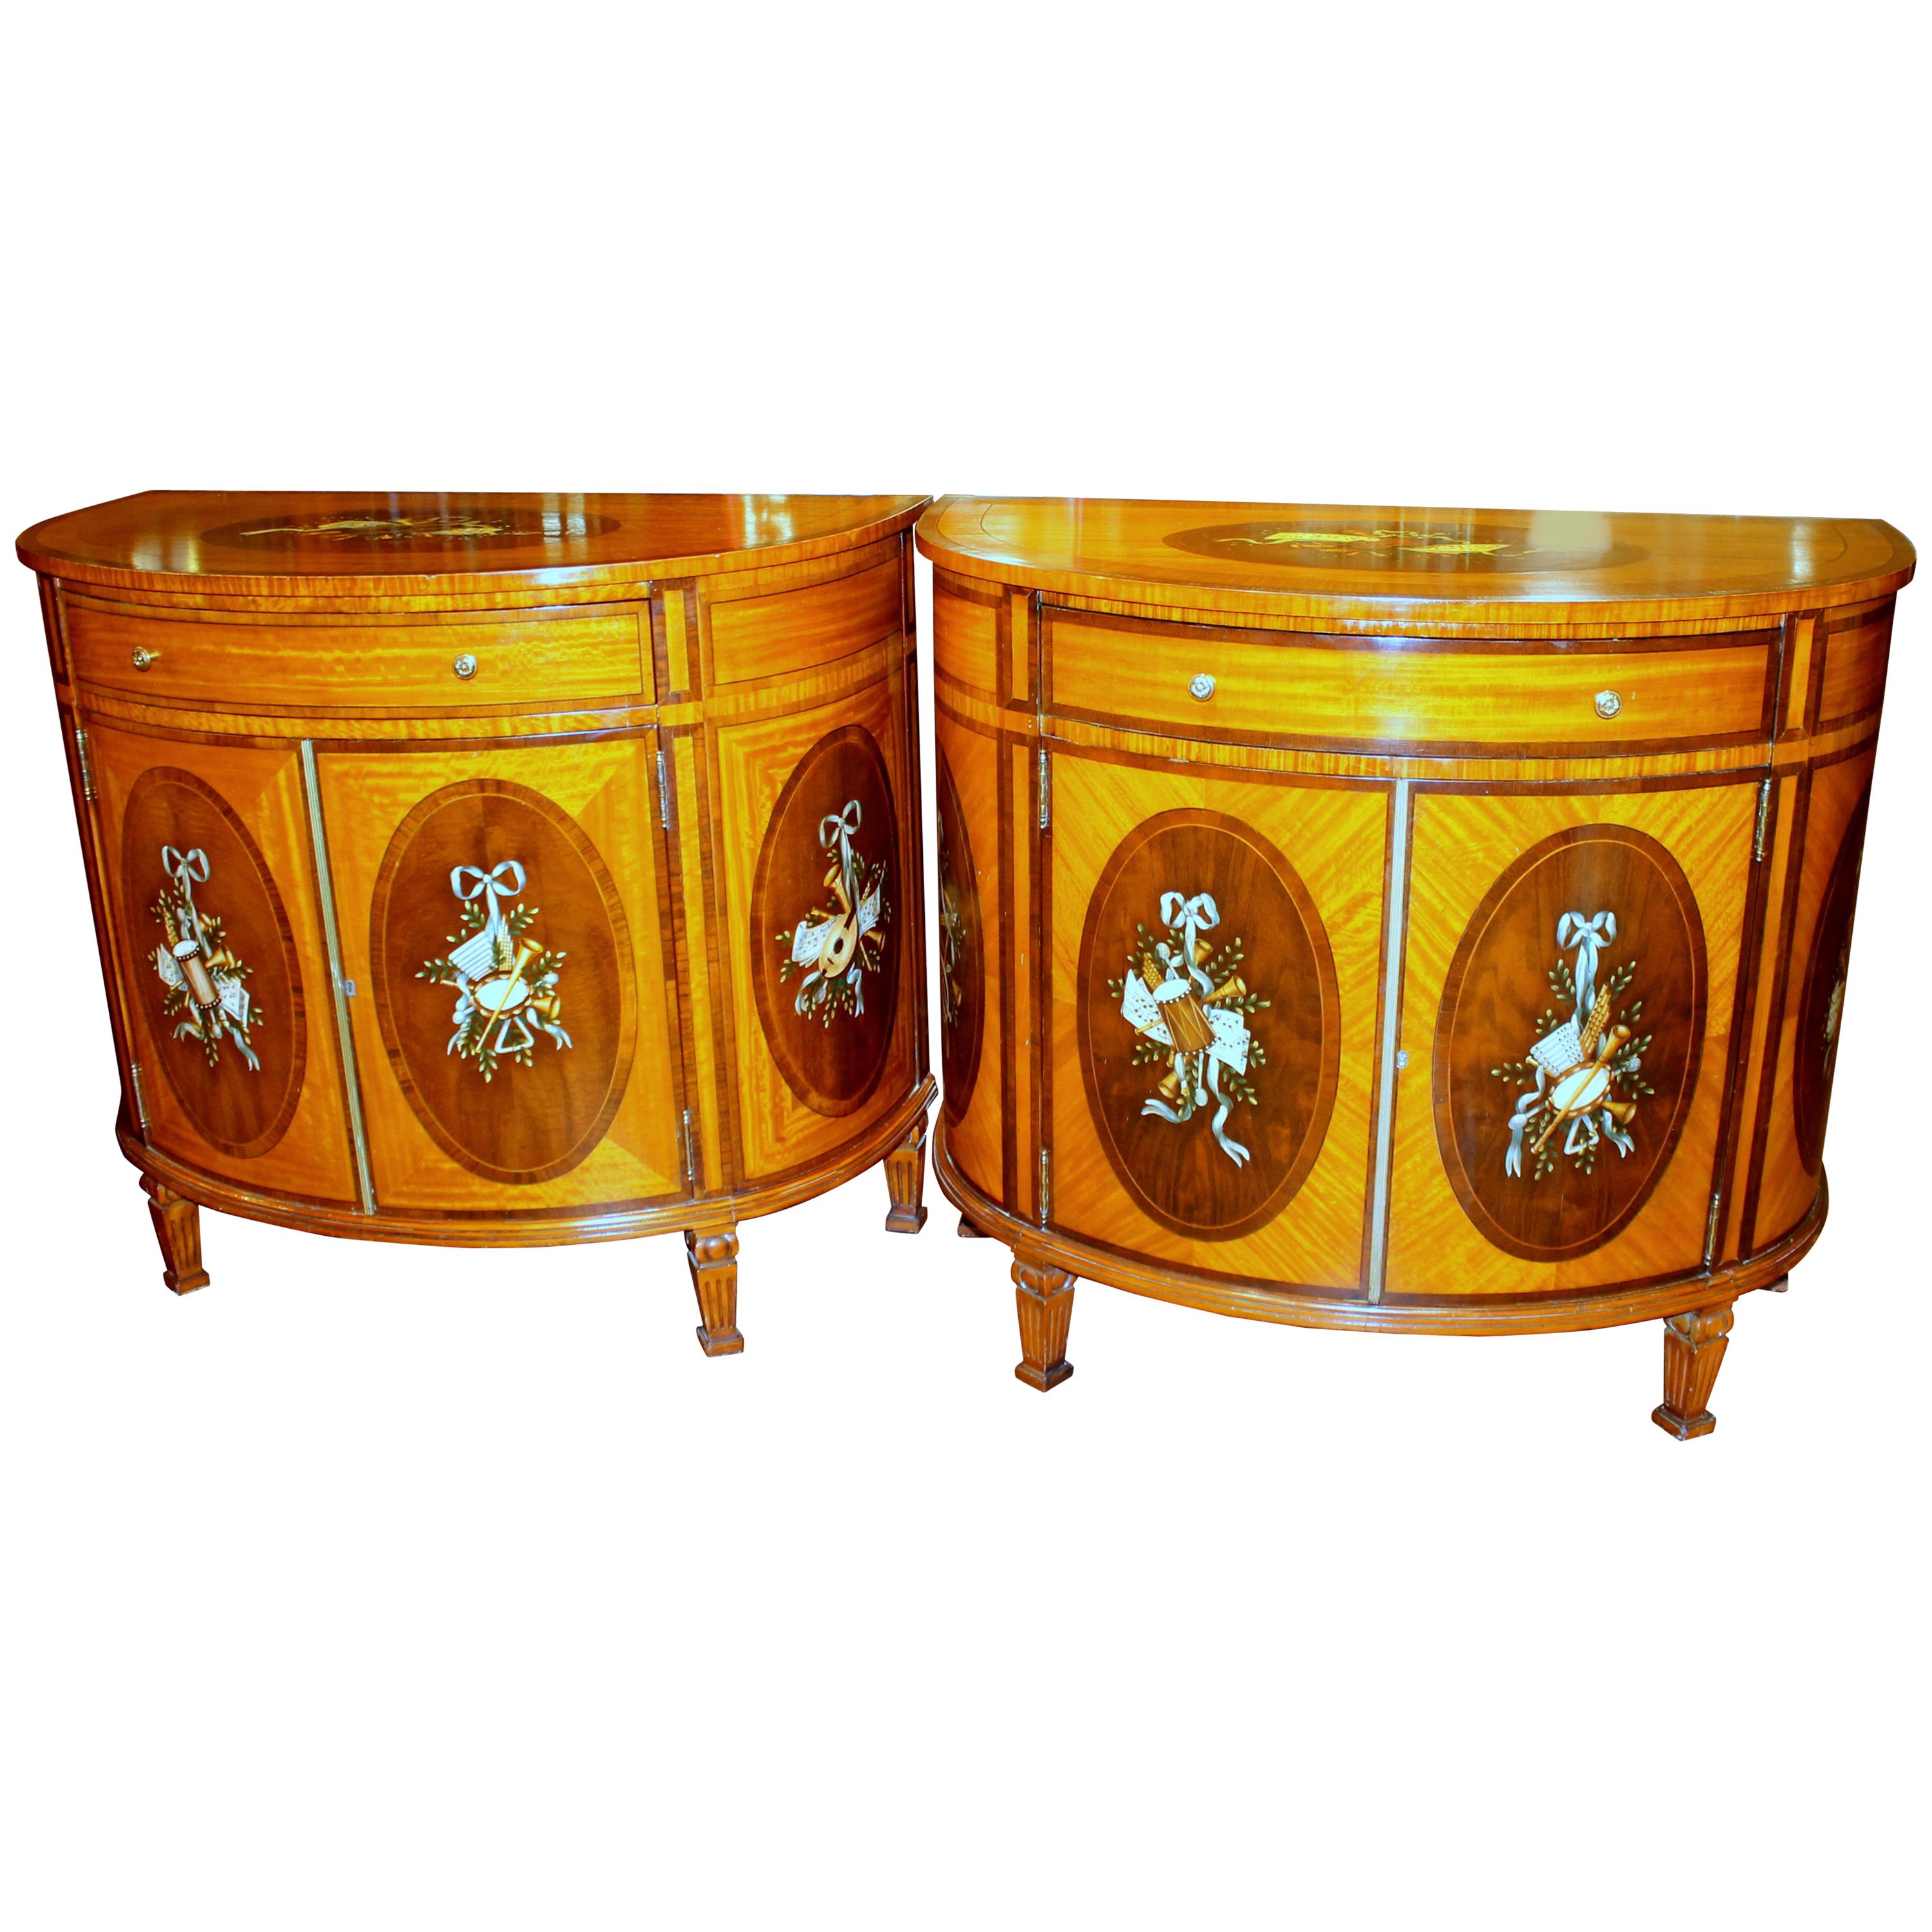 Pair of Old Reprod George III Style Hand Painted Satinwood Demilune Commodes